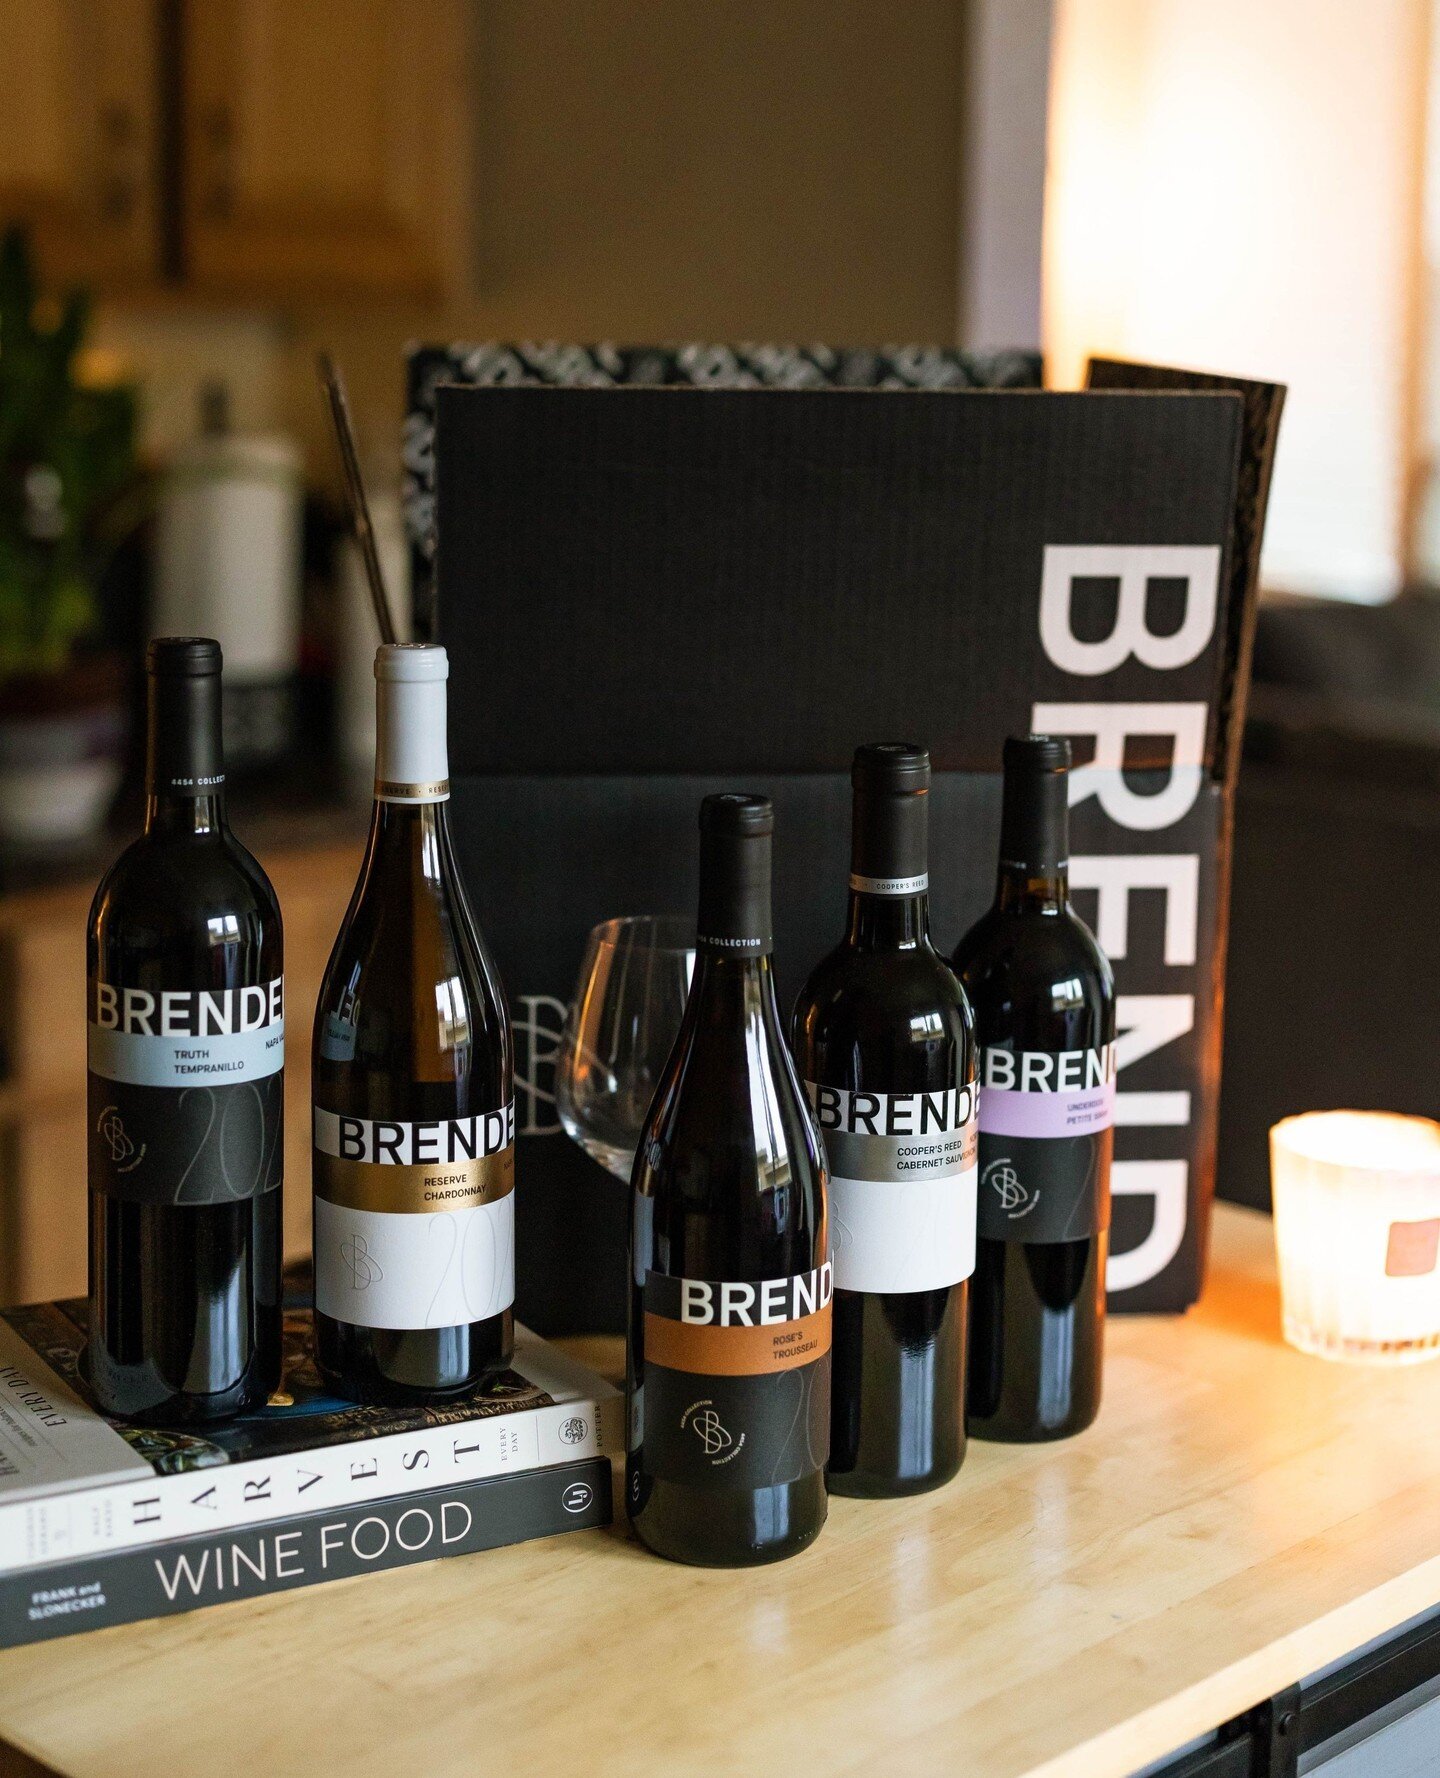 Sip, click, and let the good times roll! Enjoy Brendel wines without leaving your cozy spot. Link in bio.